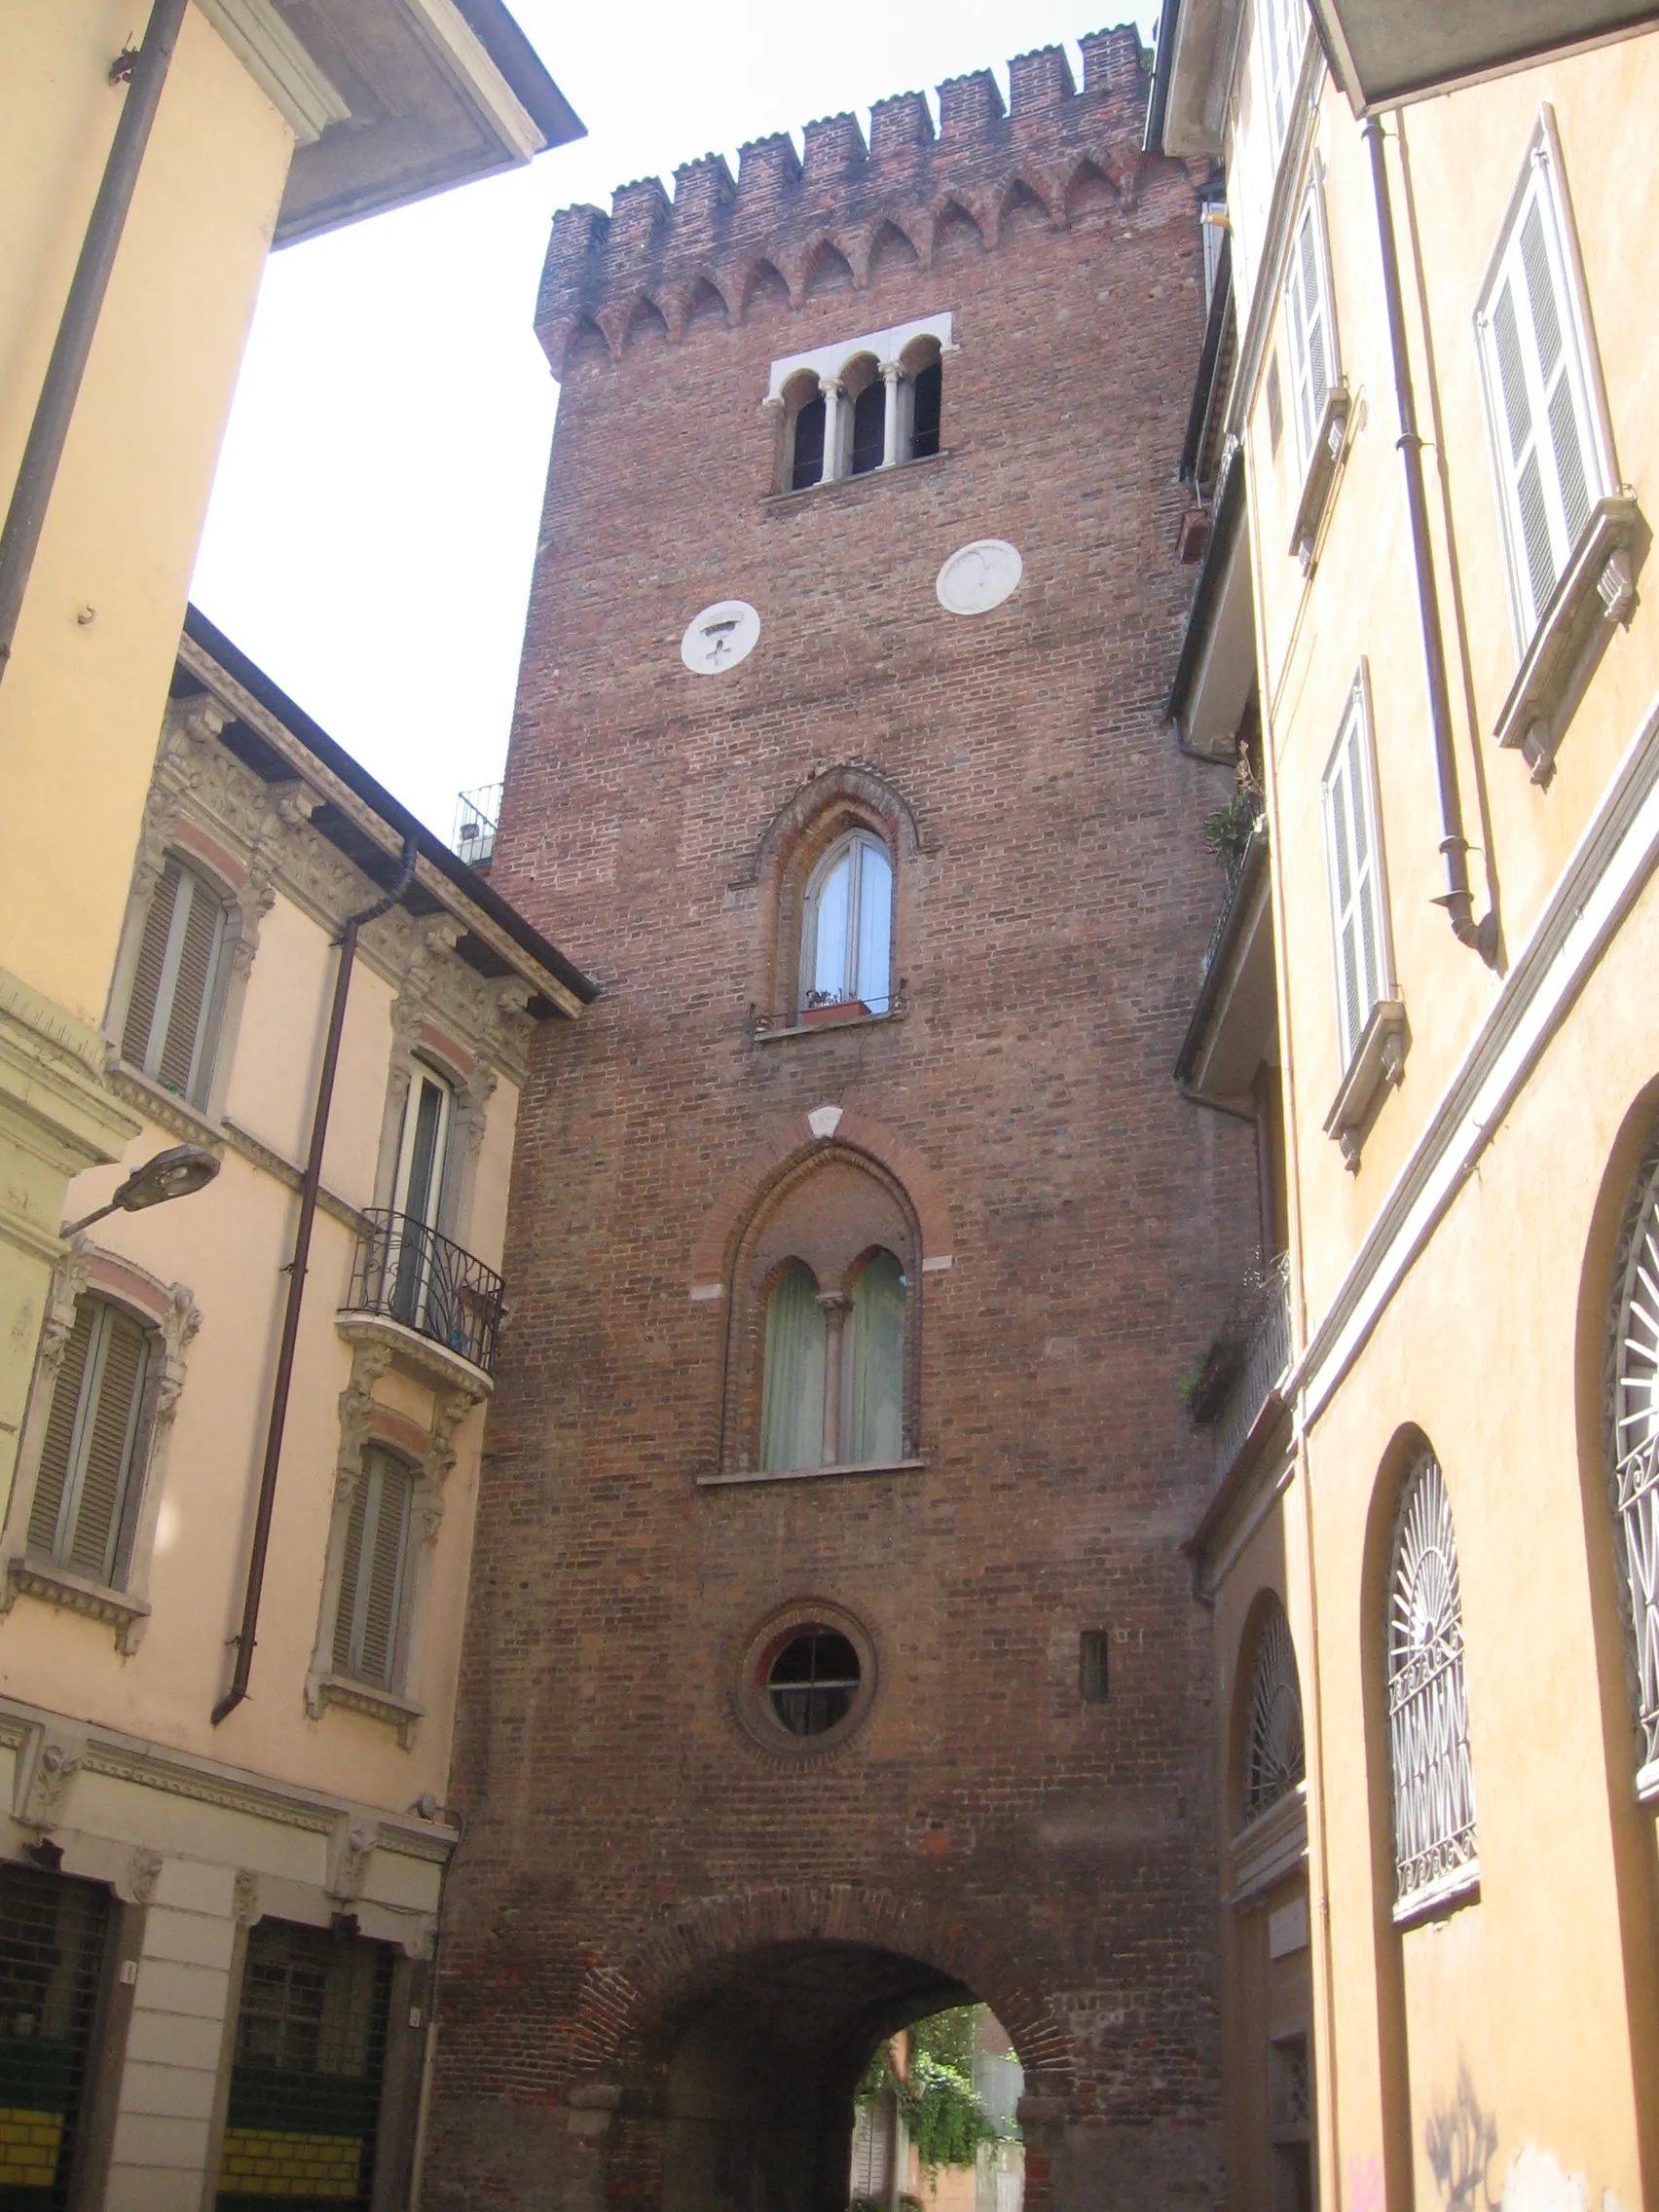 Photo showing: Theodelinda's tower in Monza.